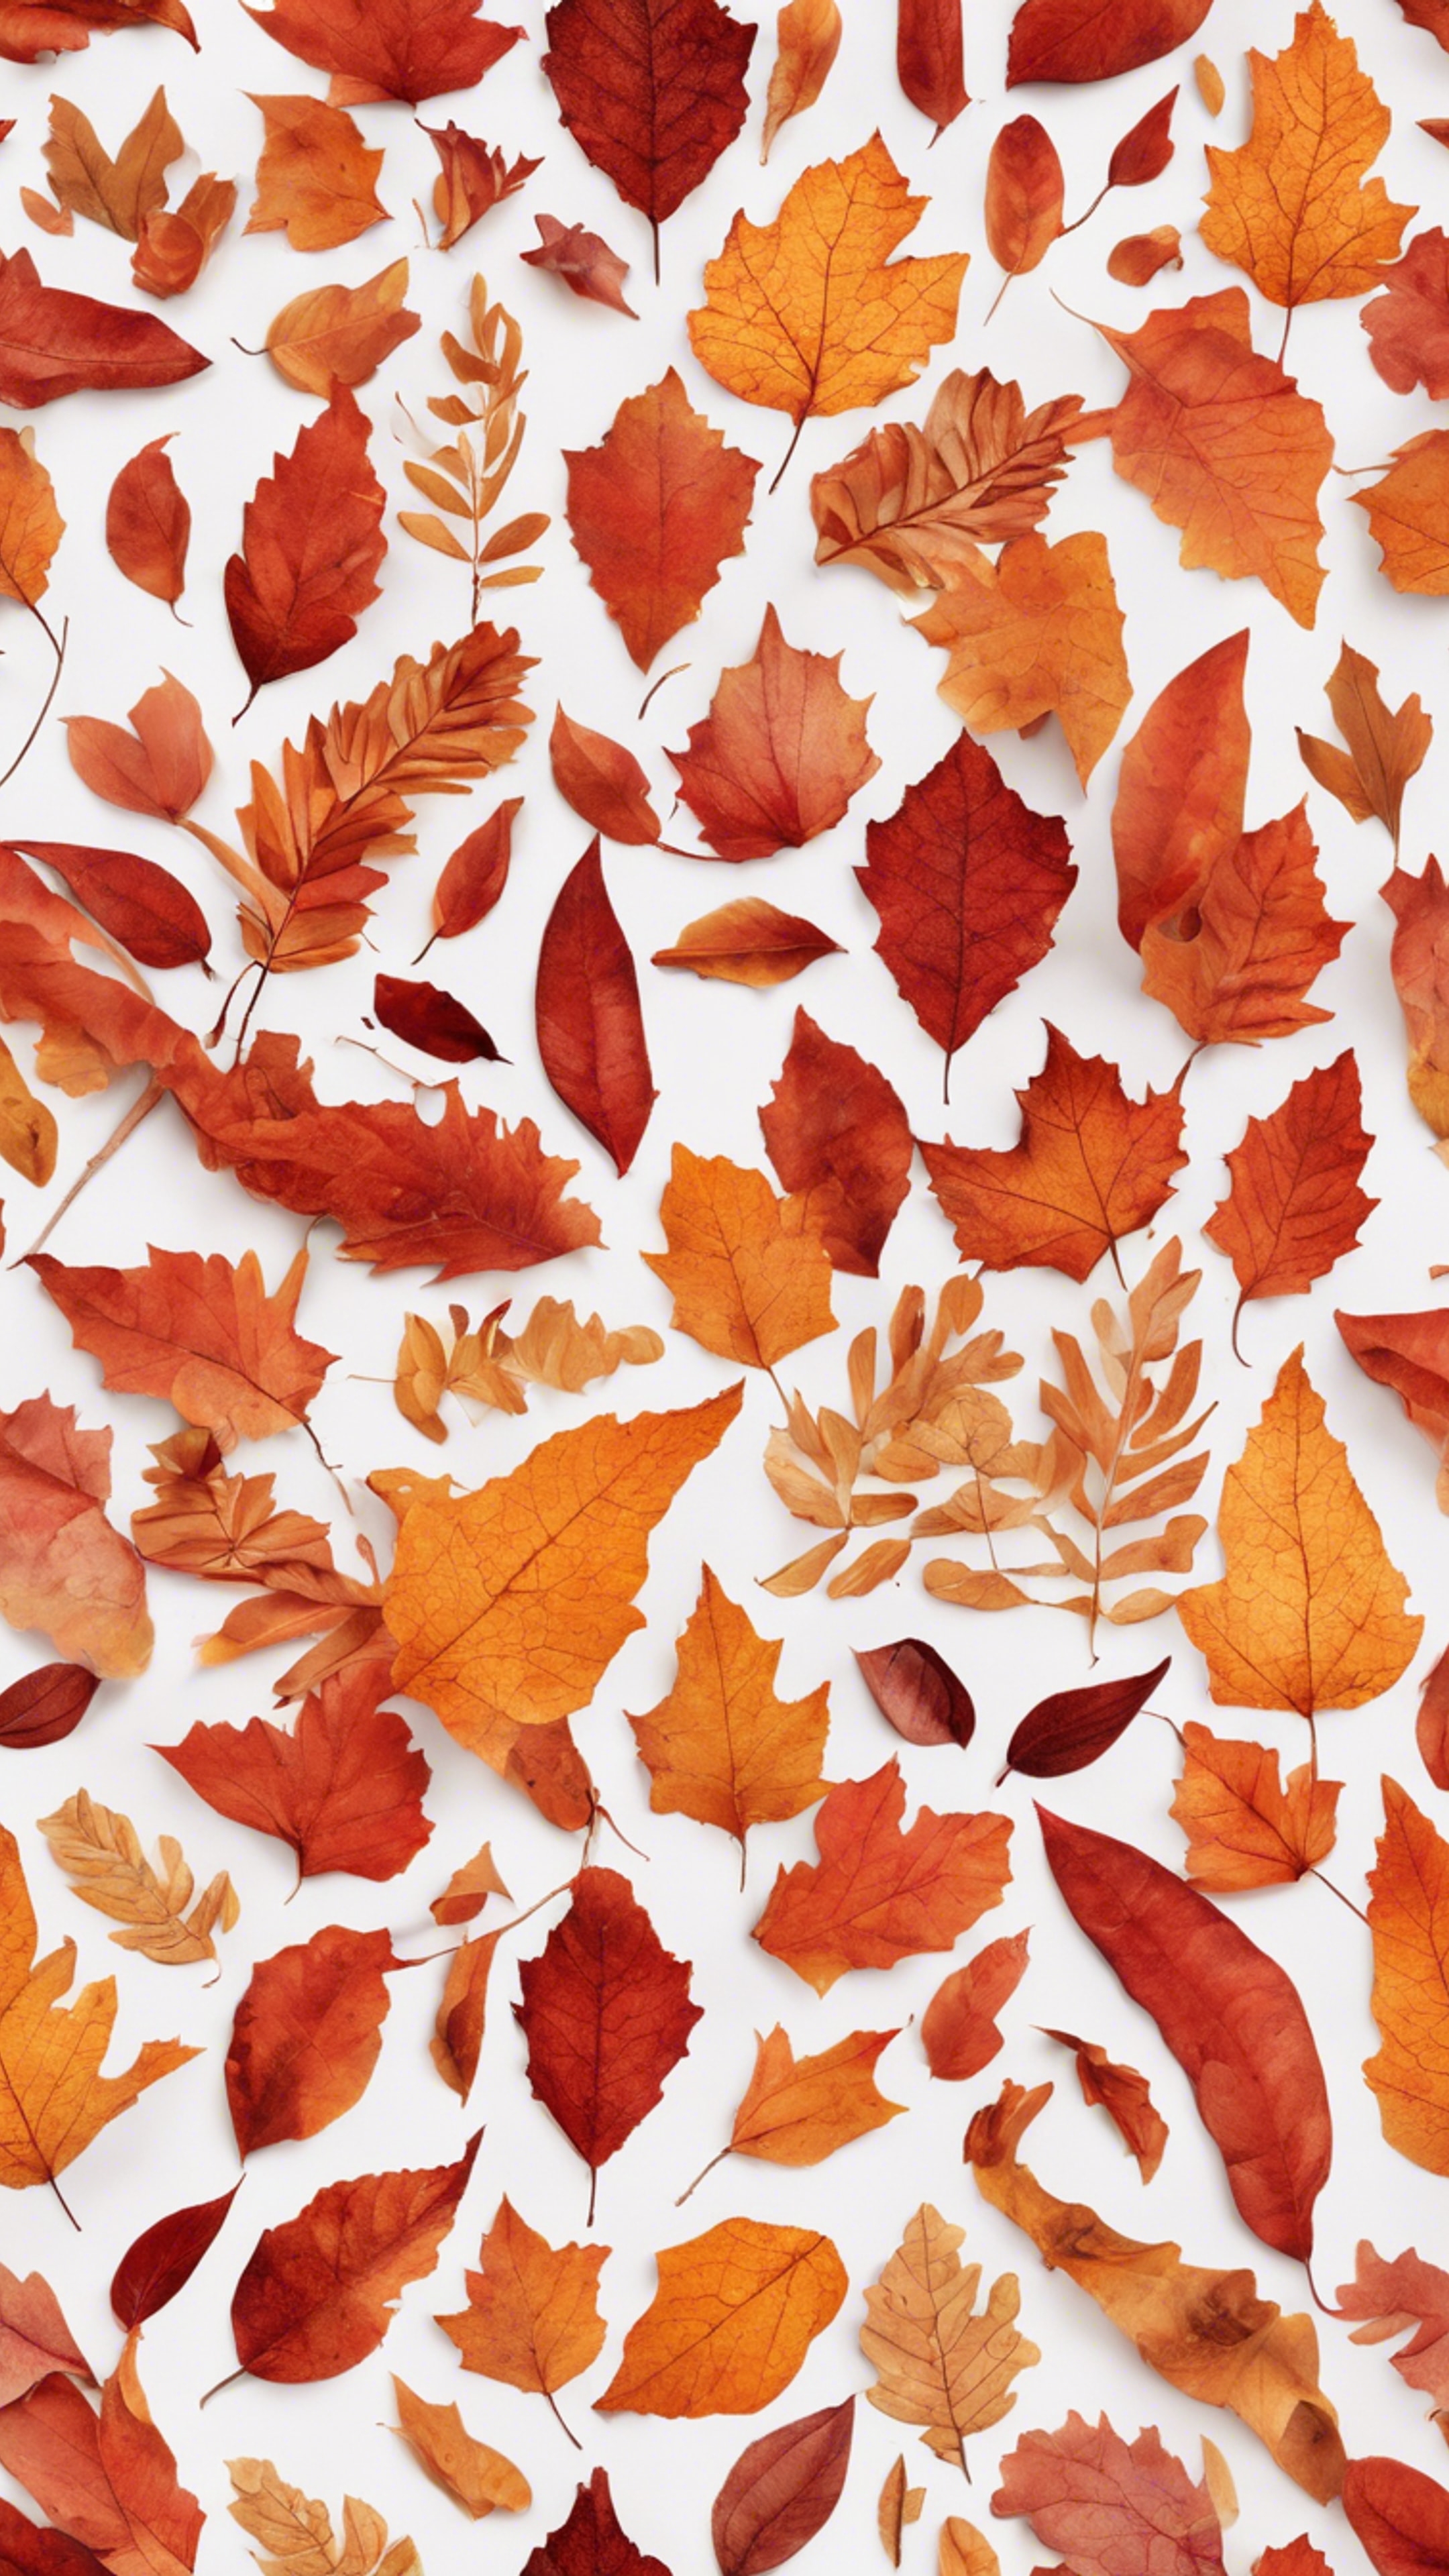 A fiery autumn pattern, reminiscent of falling leaves, in a seamless mix of red and orange. Kertas dinding[40781a28d8554bd2886e]